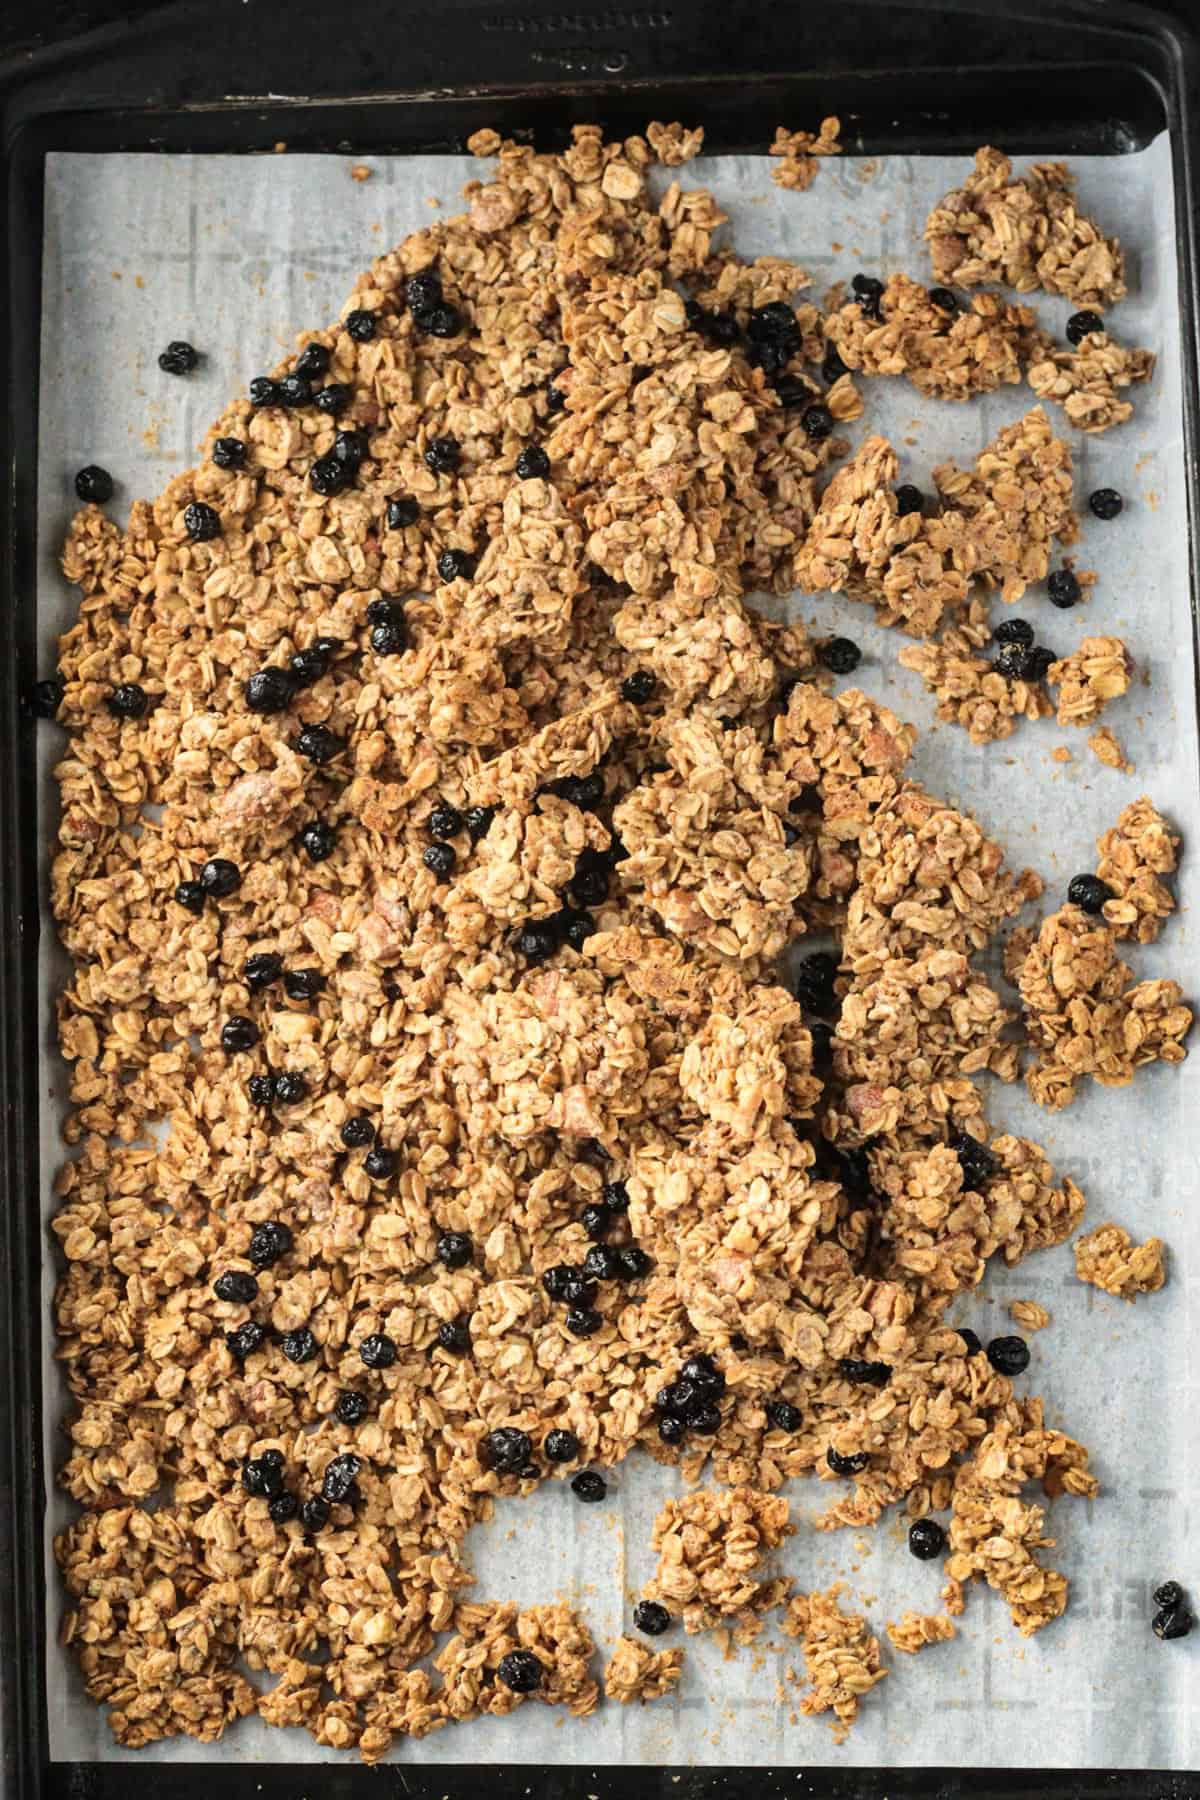 Granola on a baking sheet being broken up in clusters.